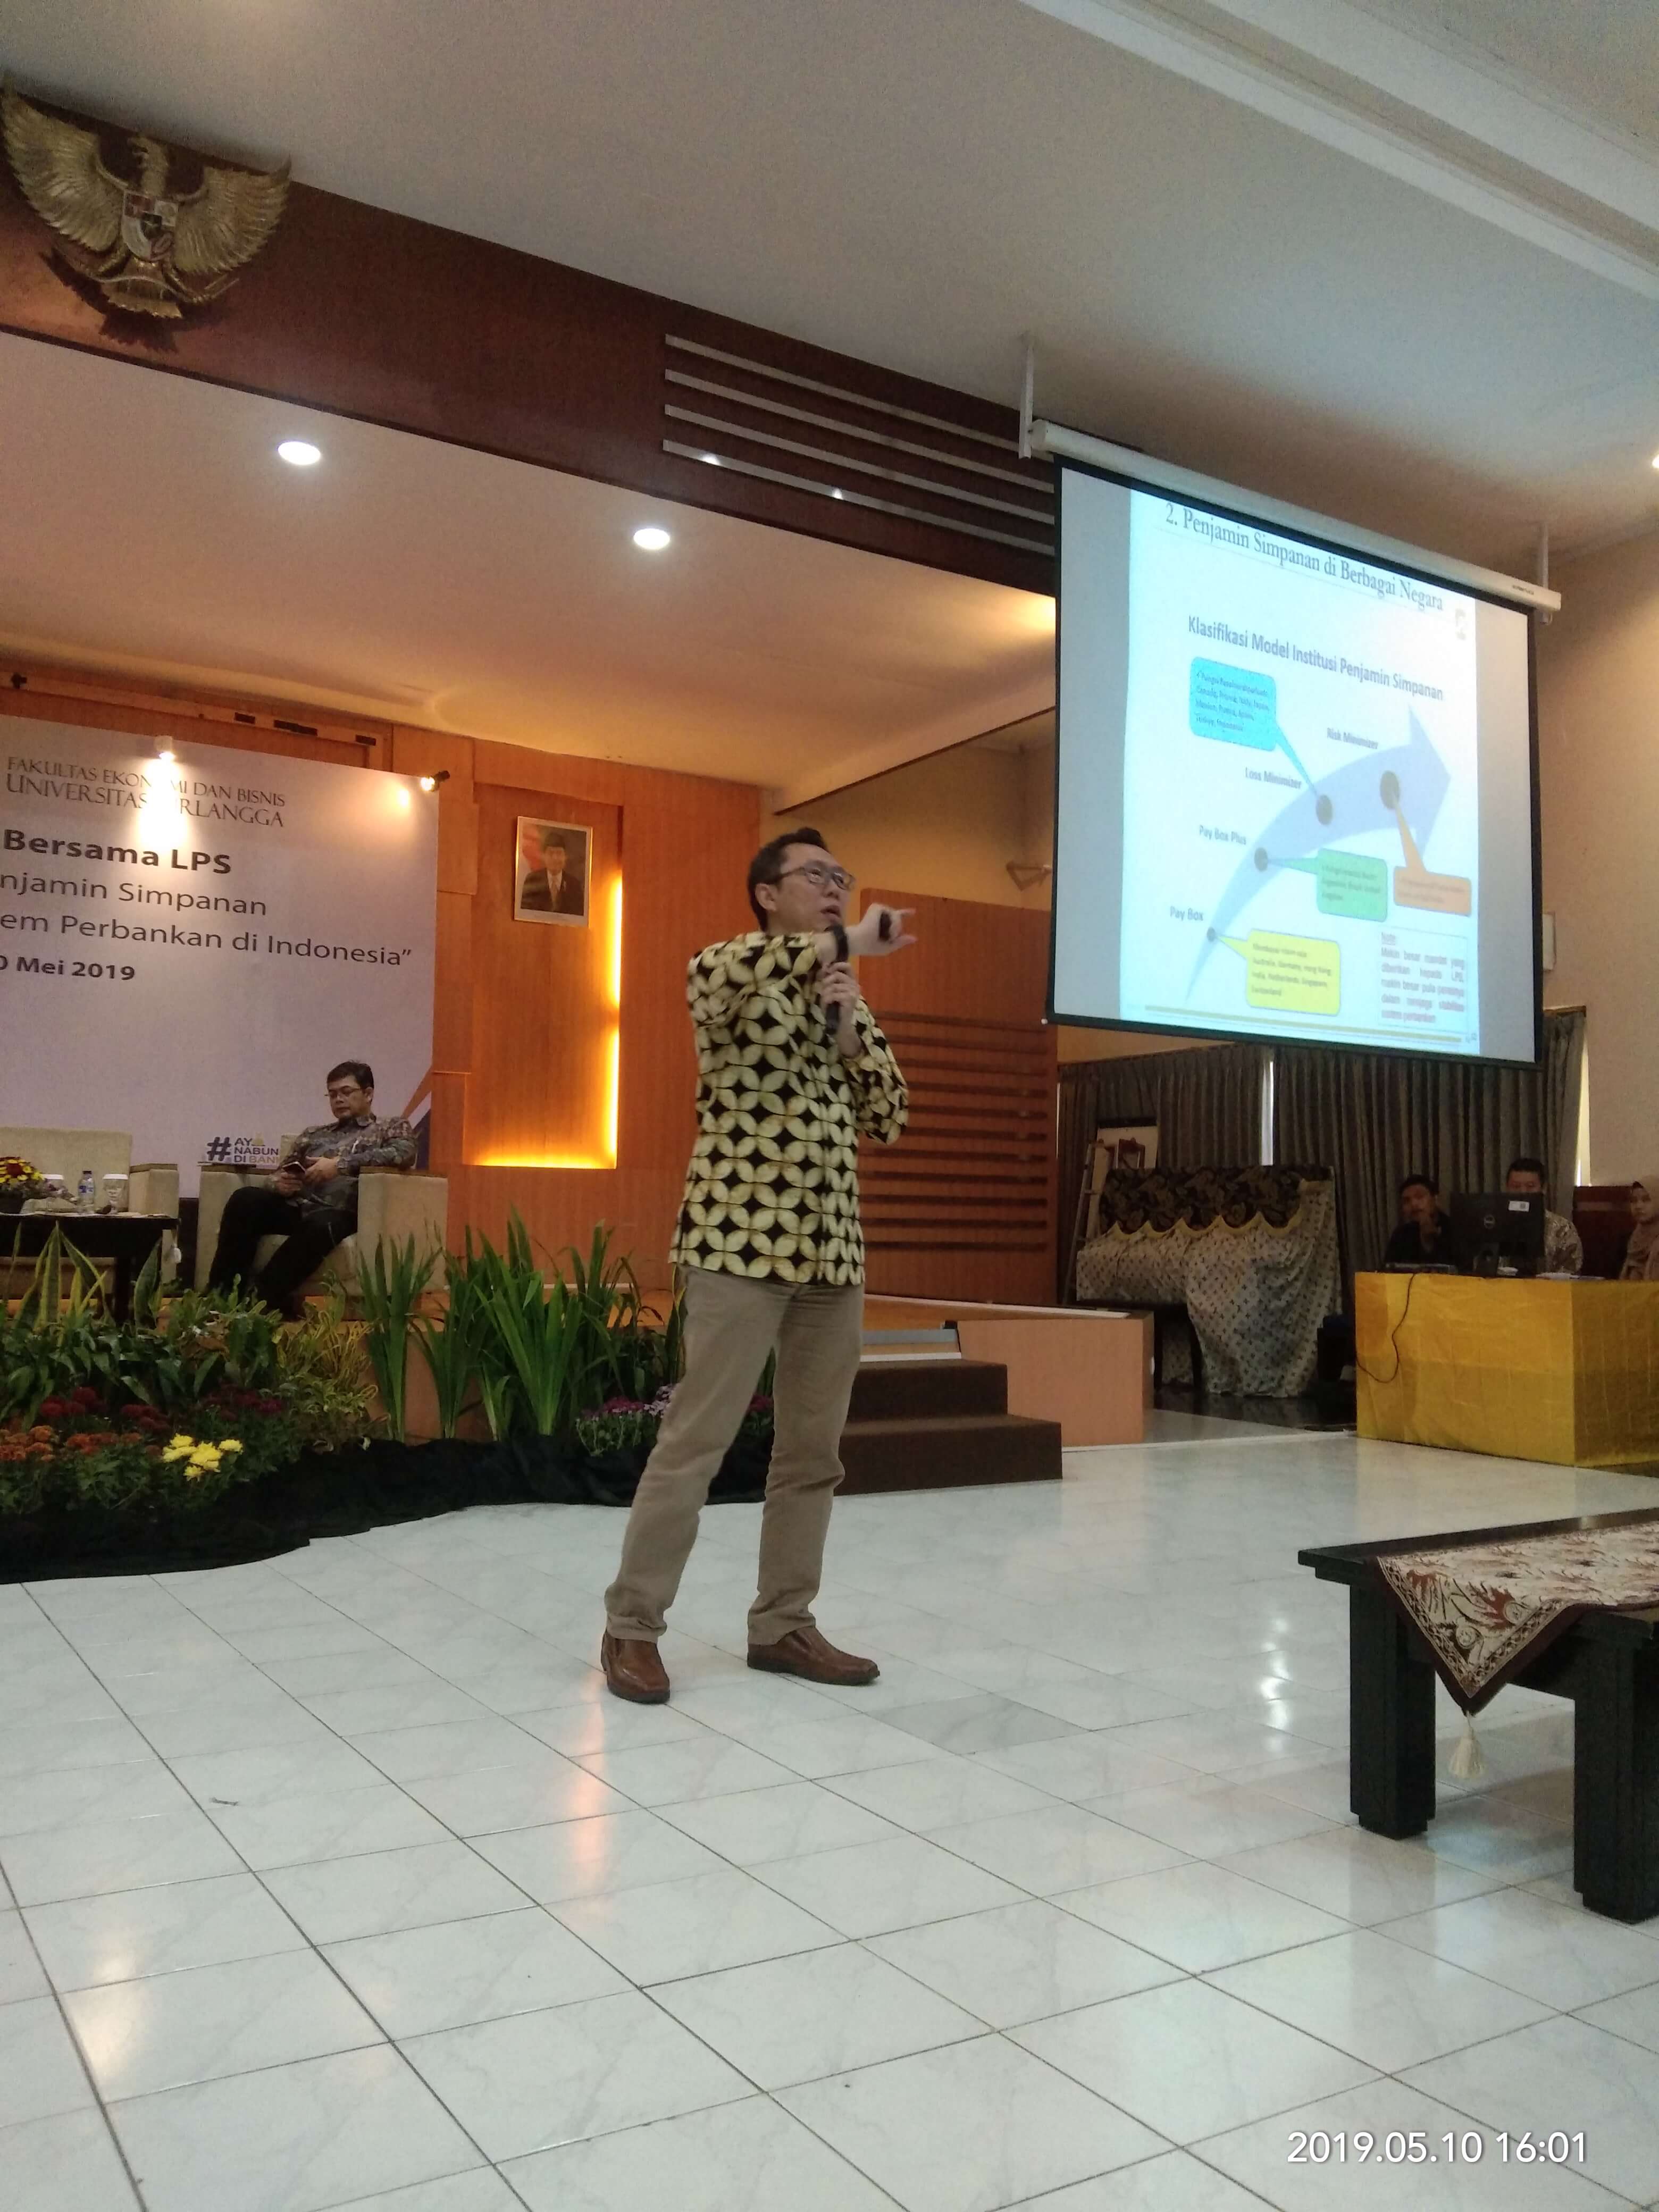 DIMAS Yuliarto (Director of LPS Policy Formulation Group) speaks about the role and function of LPS on financial system stability in Indonesia on Friday, May 10, 2019 in KRT Hall Fadjar Notonegoro.